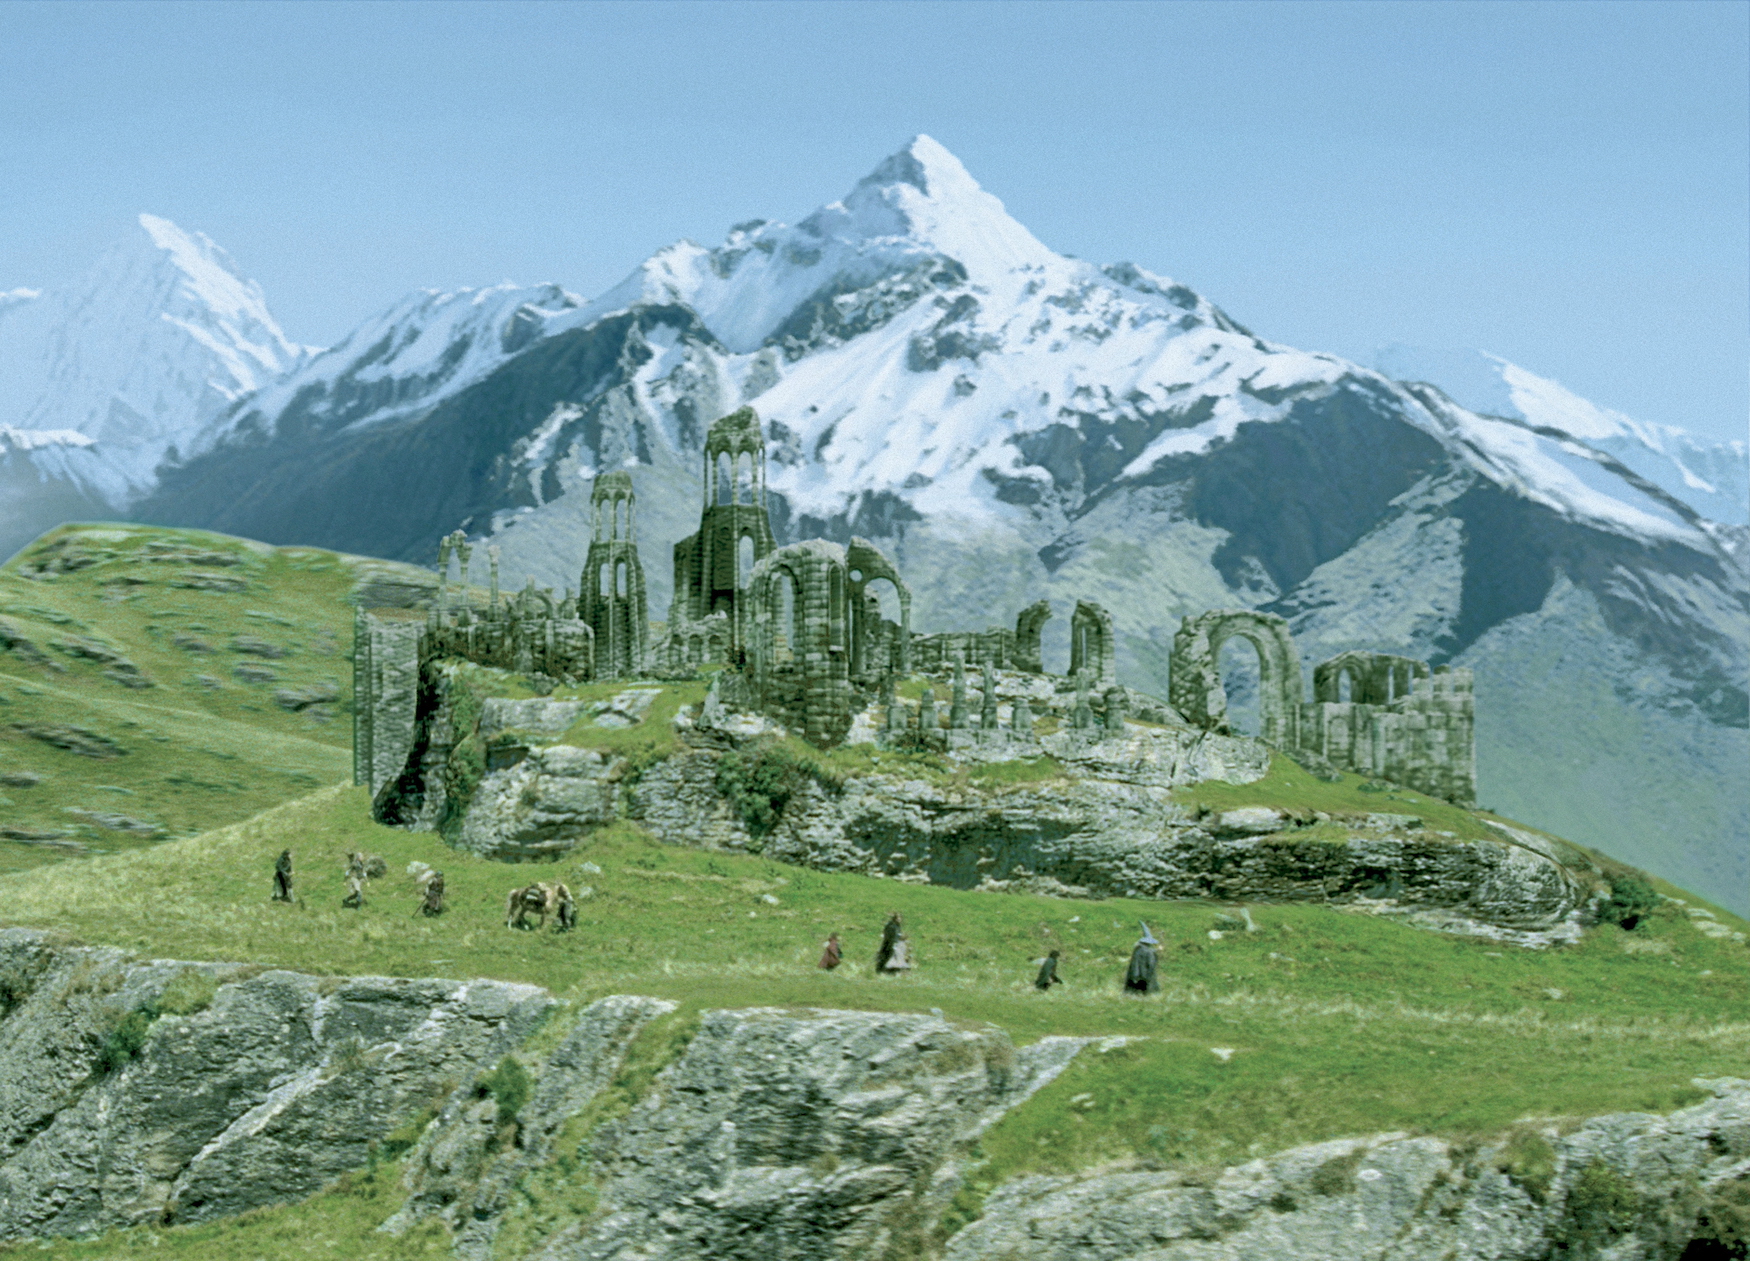 Mount Owen is one of the filming locations for Lord of the Rings